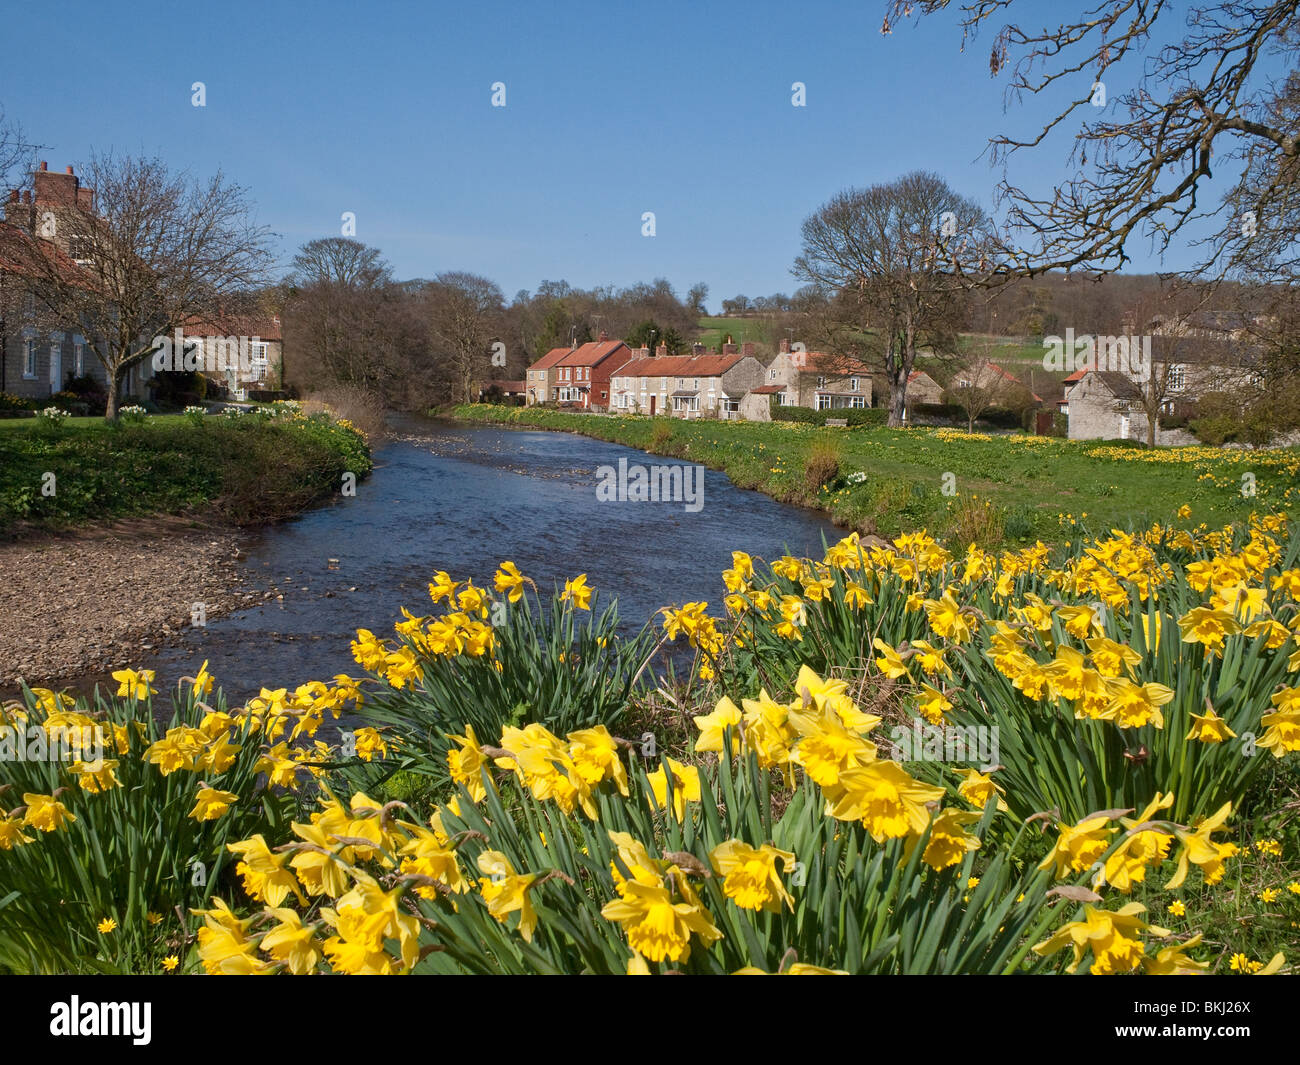 Sinnington North Yorkshire UK River Seven Cottages and Daffodils Stock Photo